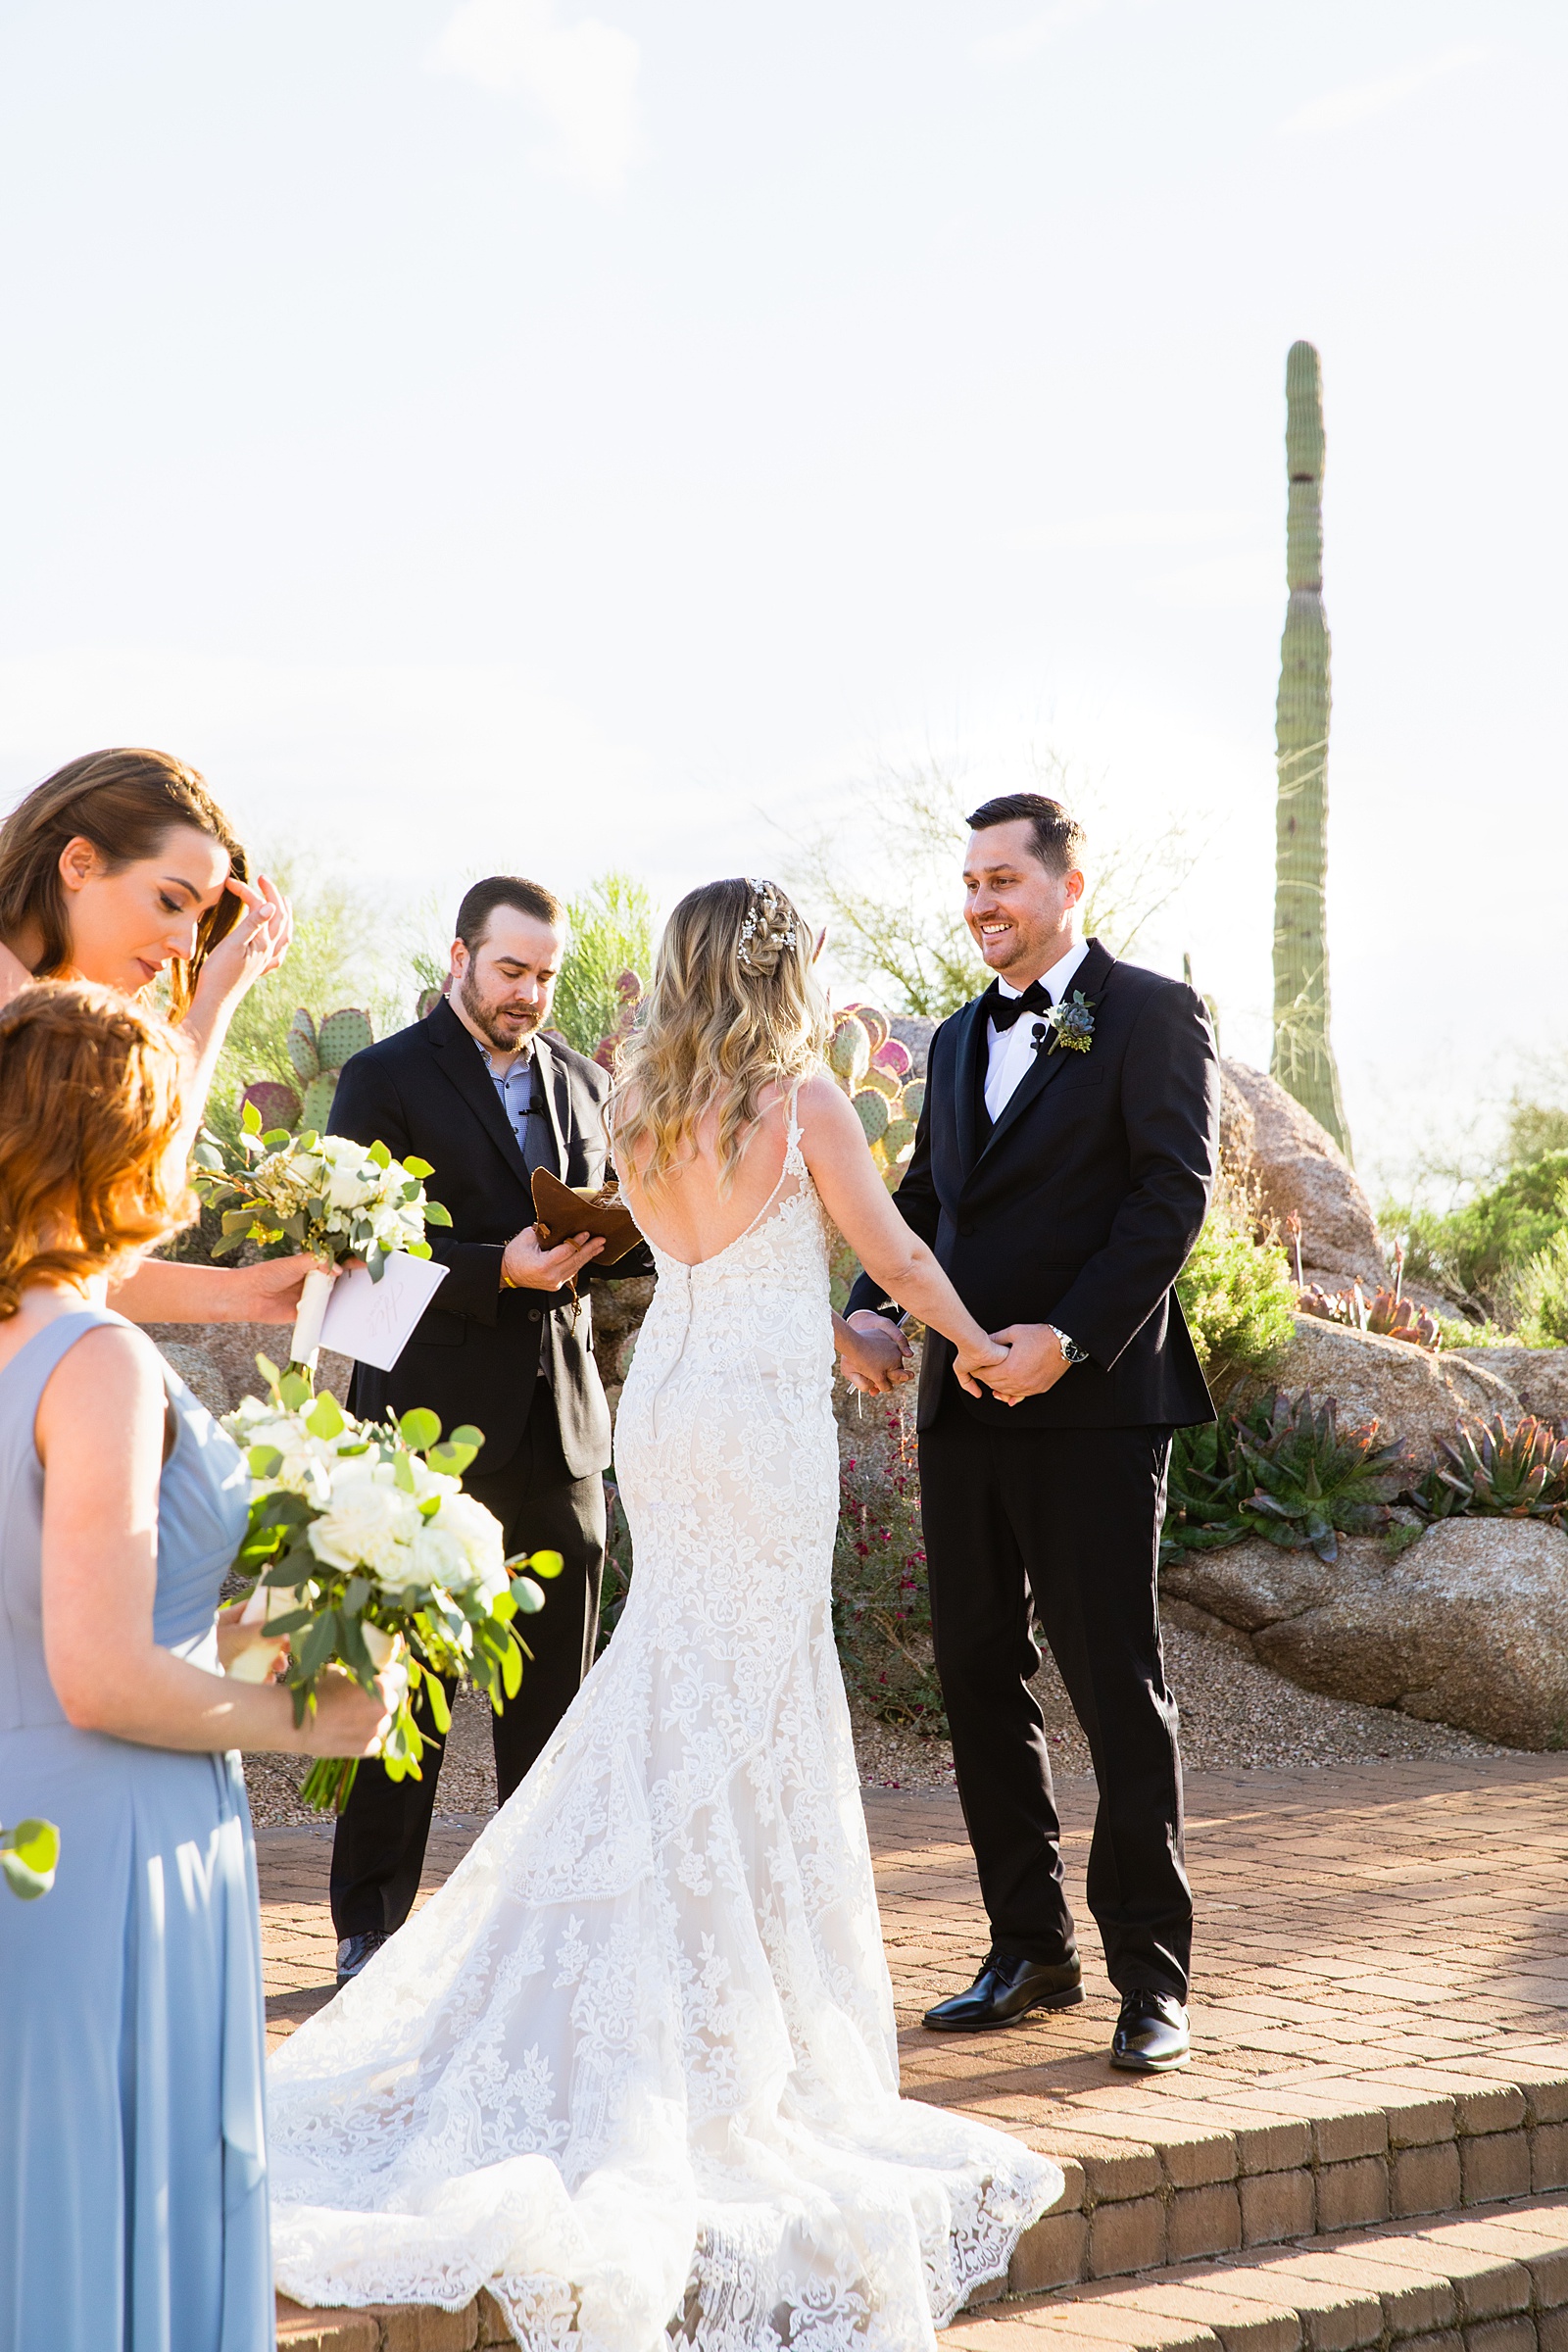 Groom looking at his bride during their wedding ceremony at Troon North by Scottsdale wedding photographer PMA Photography.